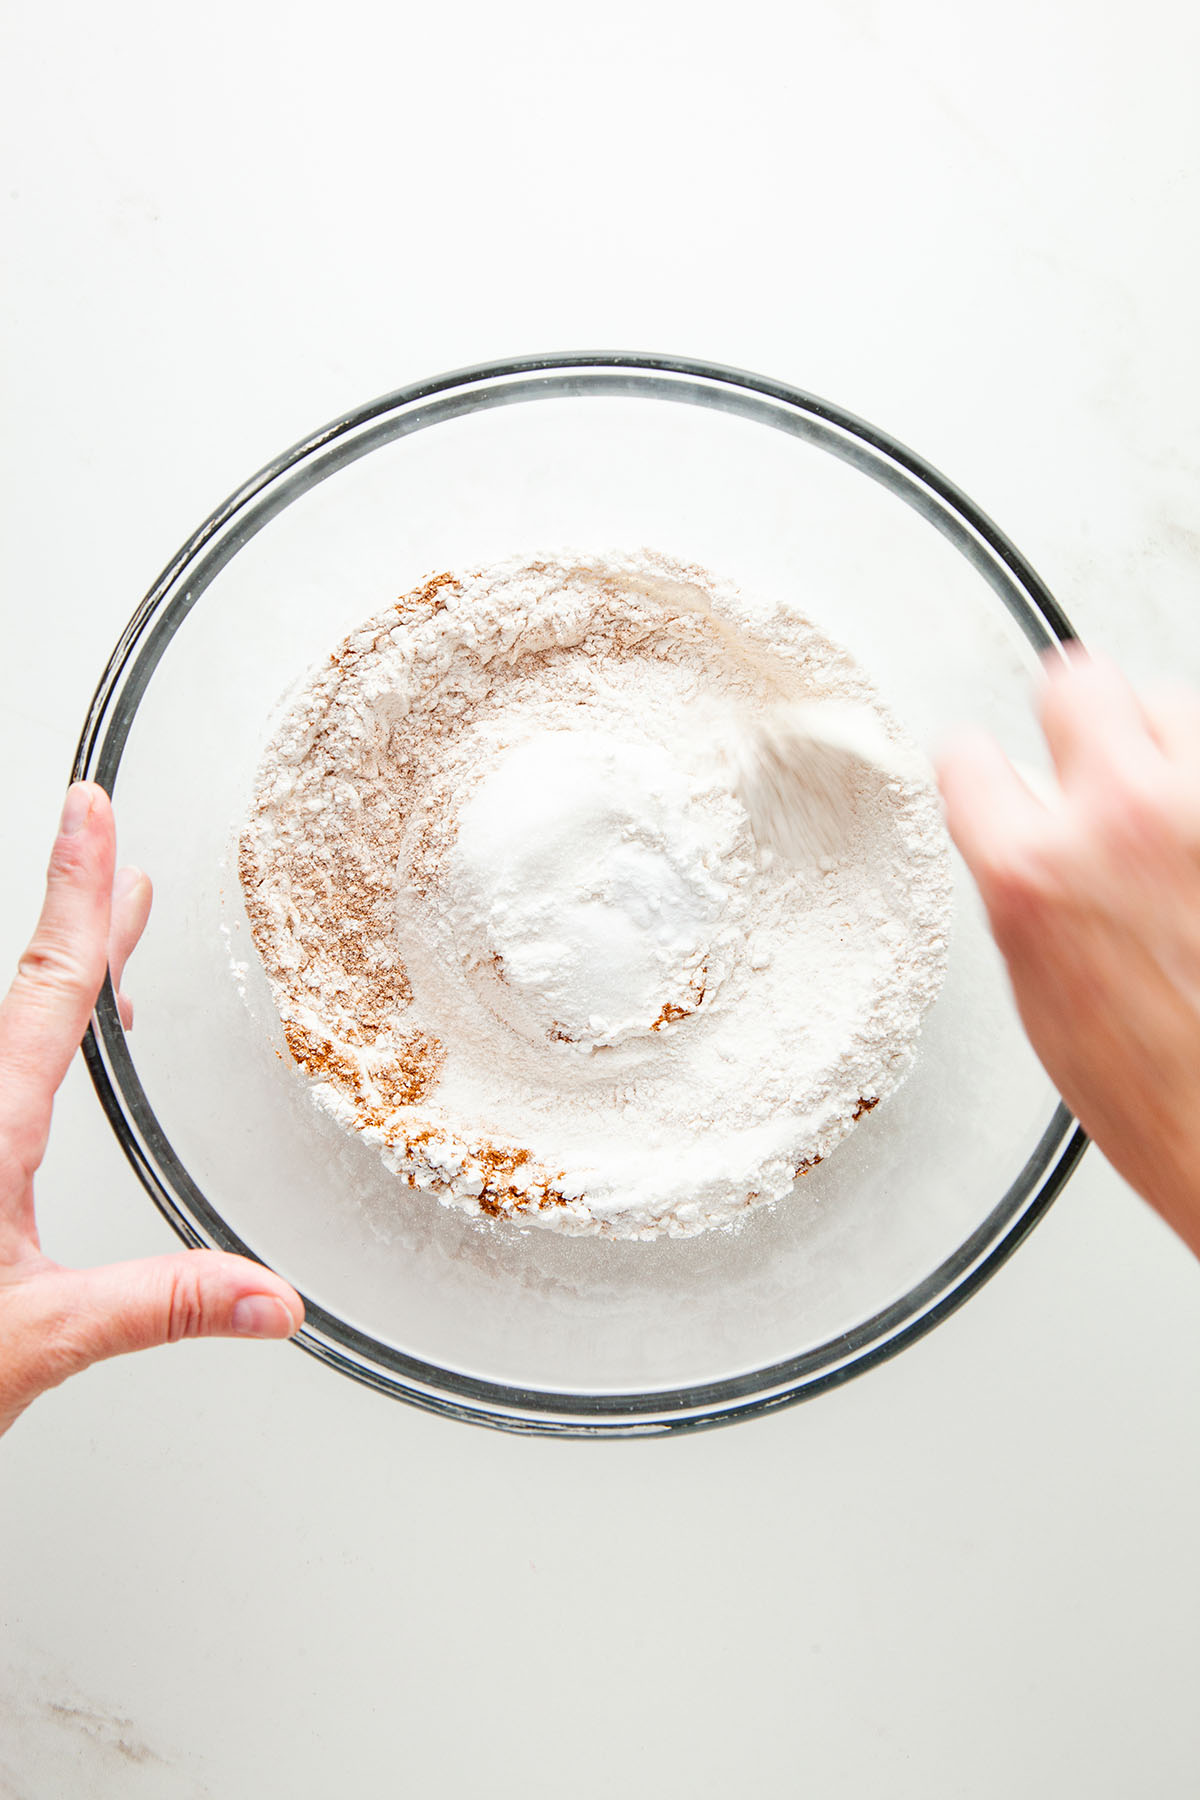 A hand mixing flour, sugar, and spice in a glass bowl.